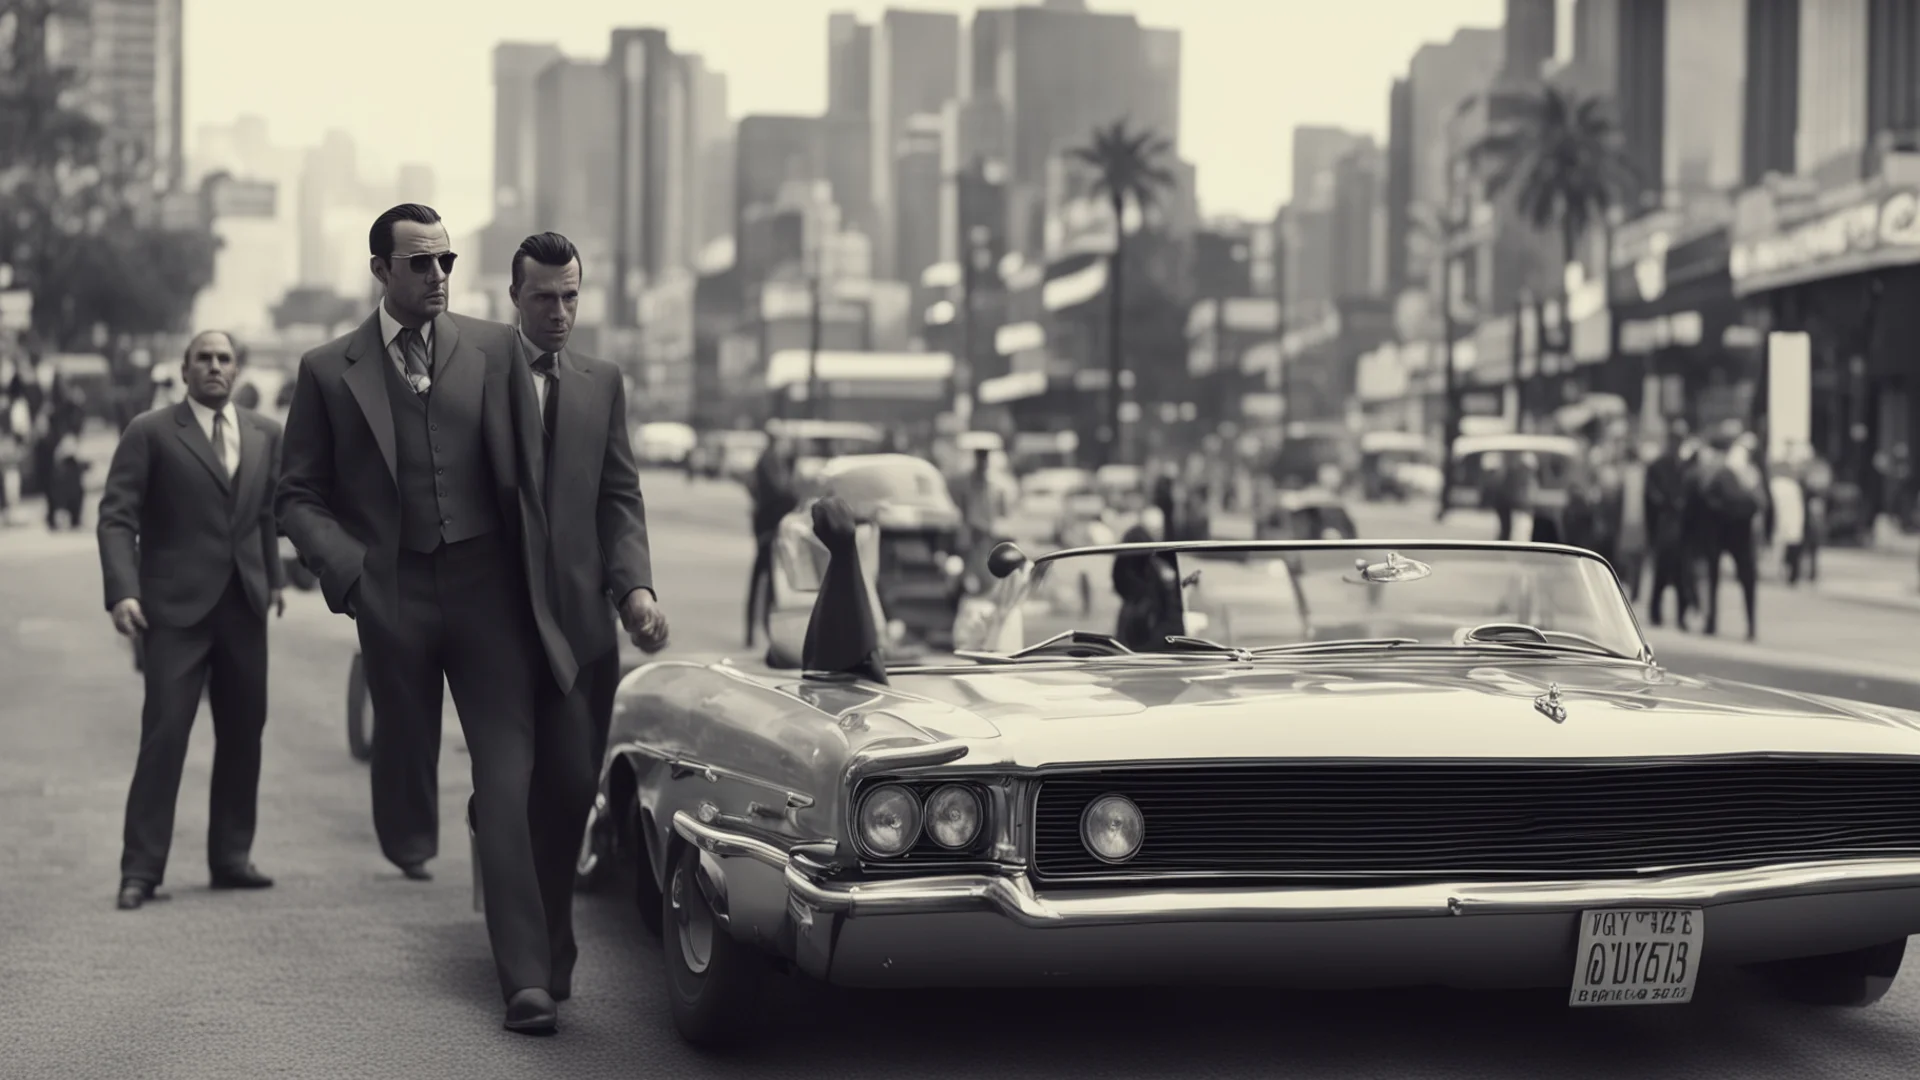 gangster movie scene out of the 60ies in the style of gta 5 good looking trending fantastic 1 wide